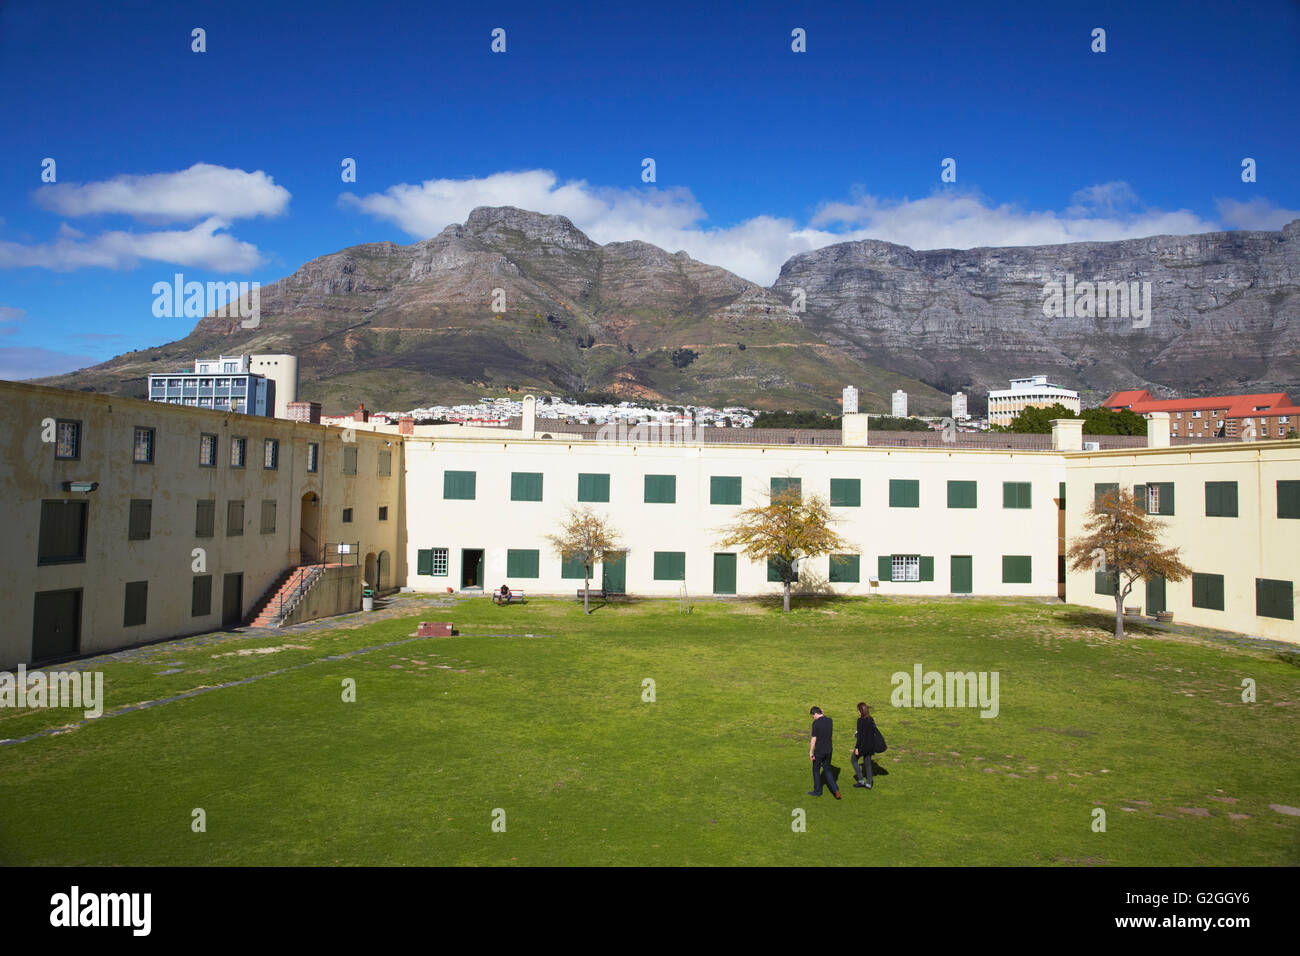 People walking across courtyard of Castle of Good Hope with Table Mountain in background, City Bowl, Cape Town, Western Cape, So Stock Photo